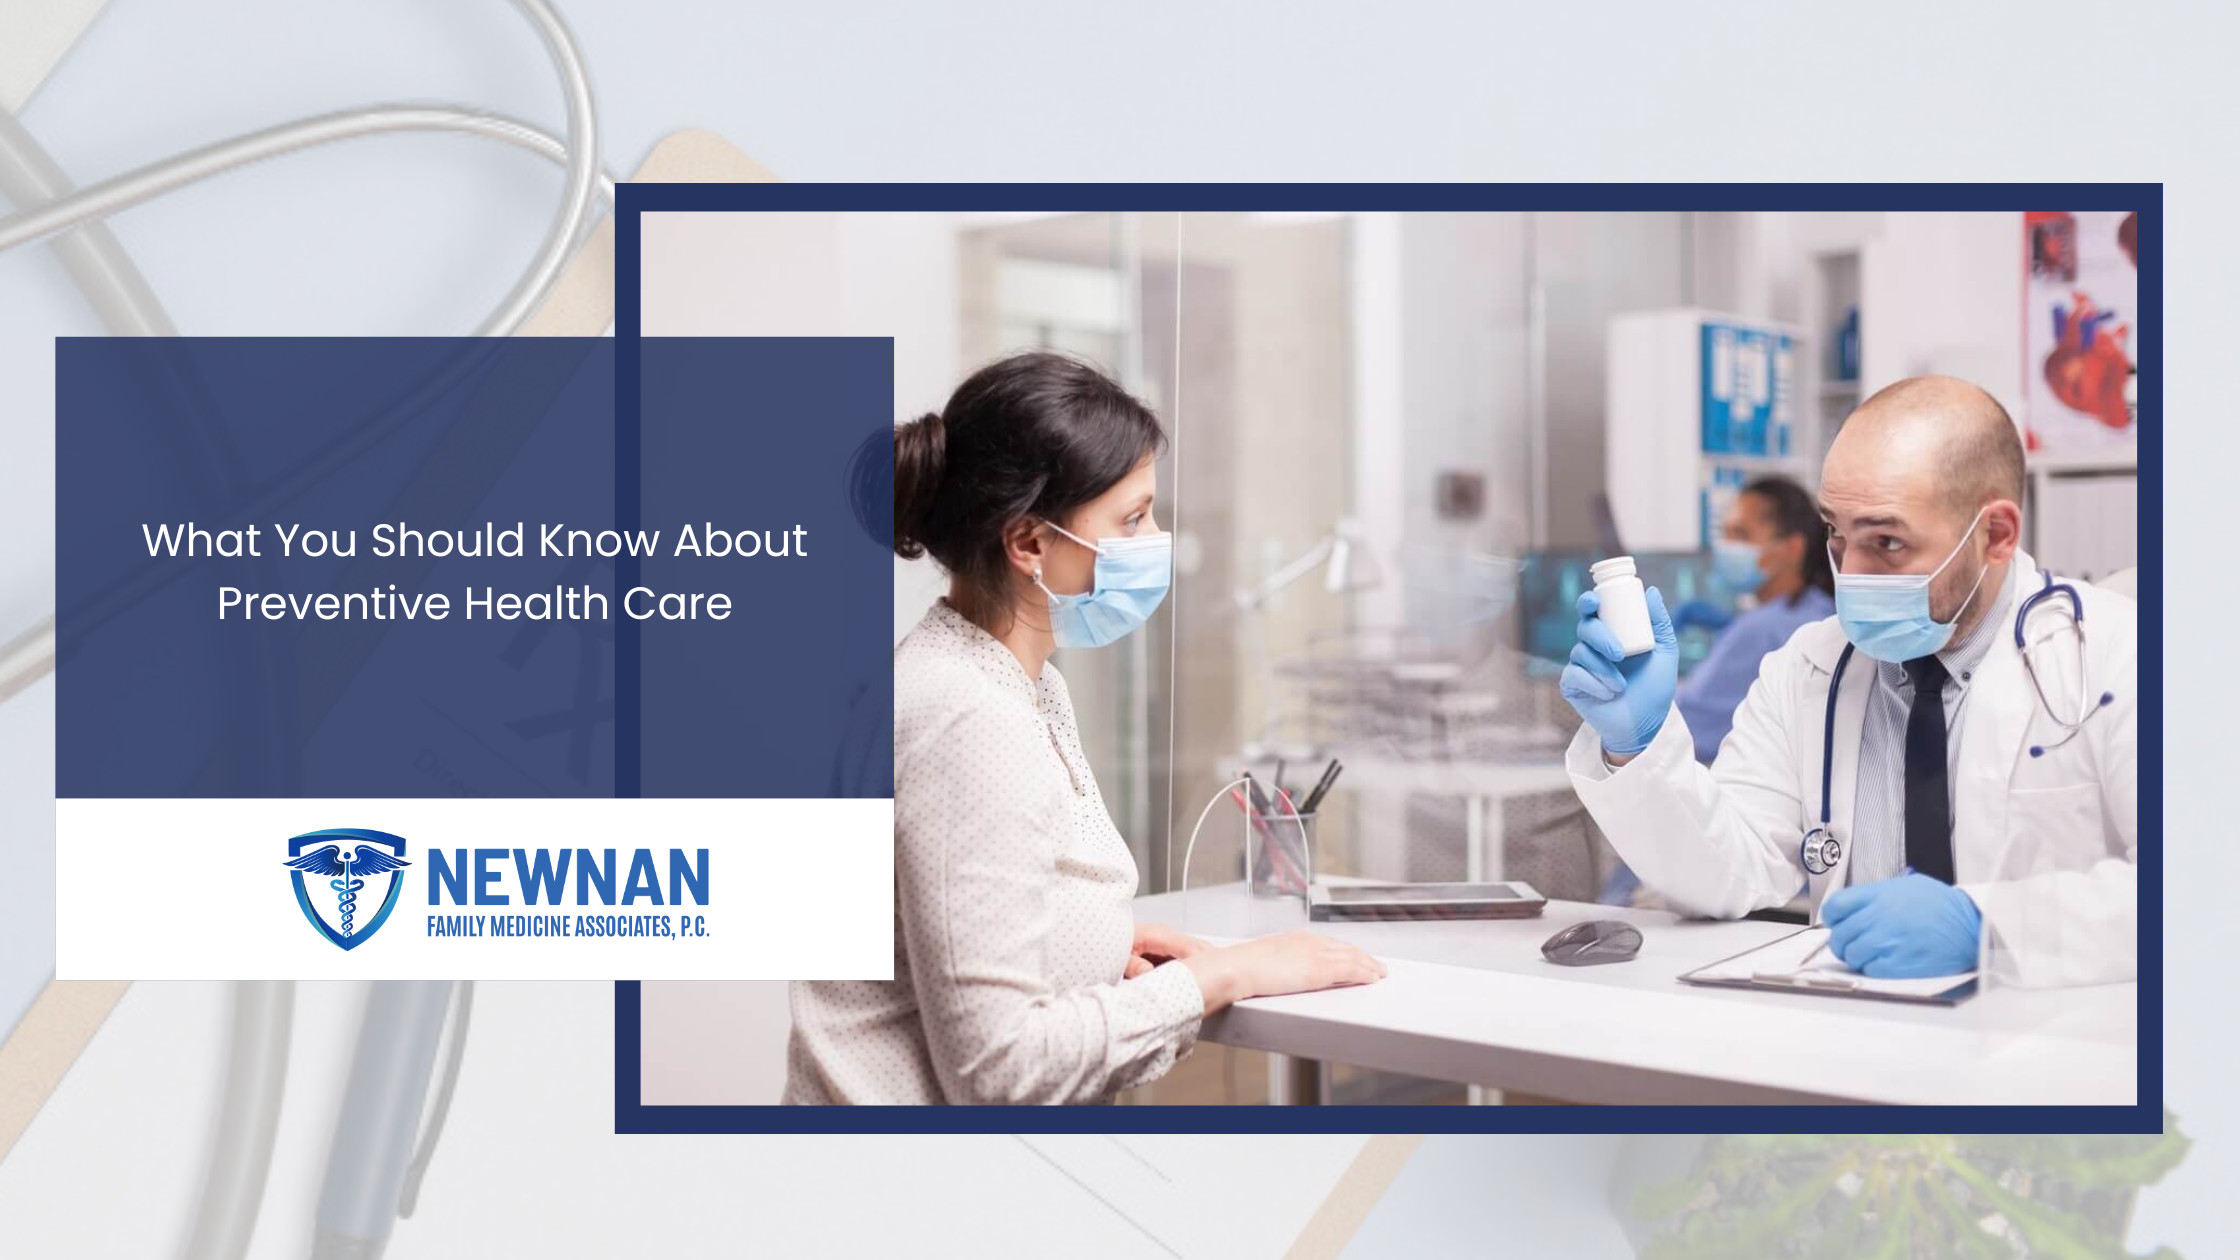 What You Should Know About Preventive Health Care